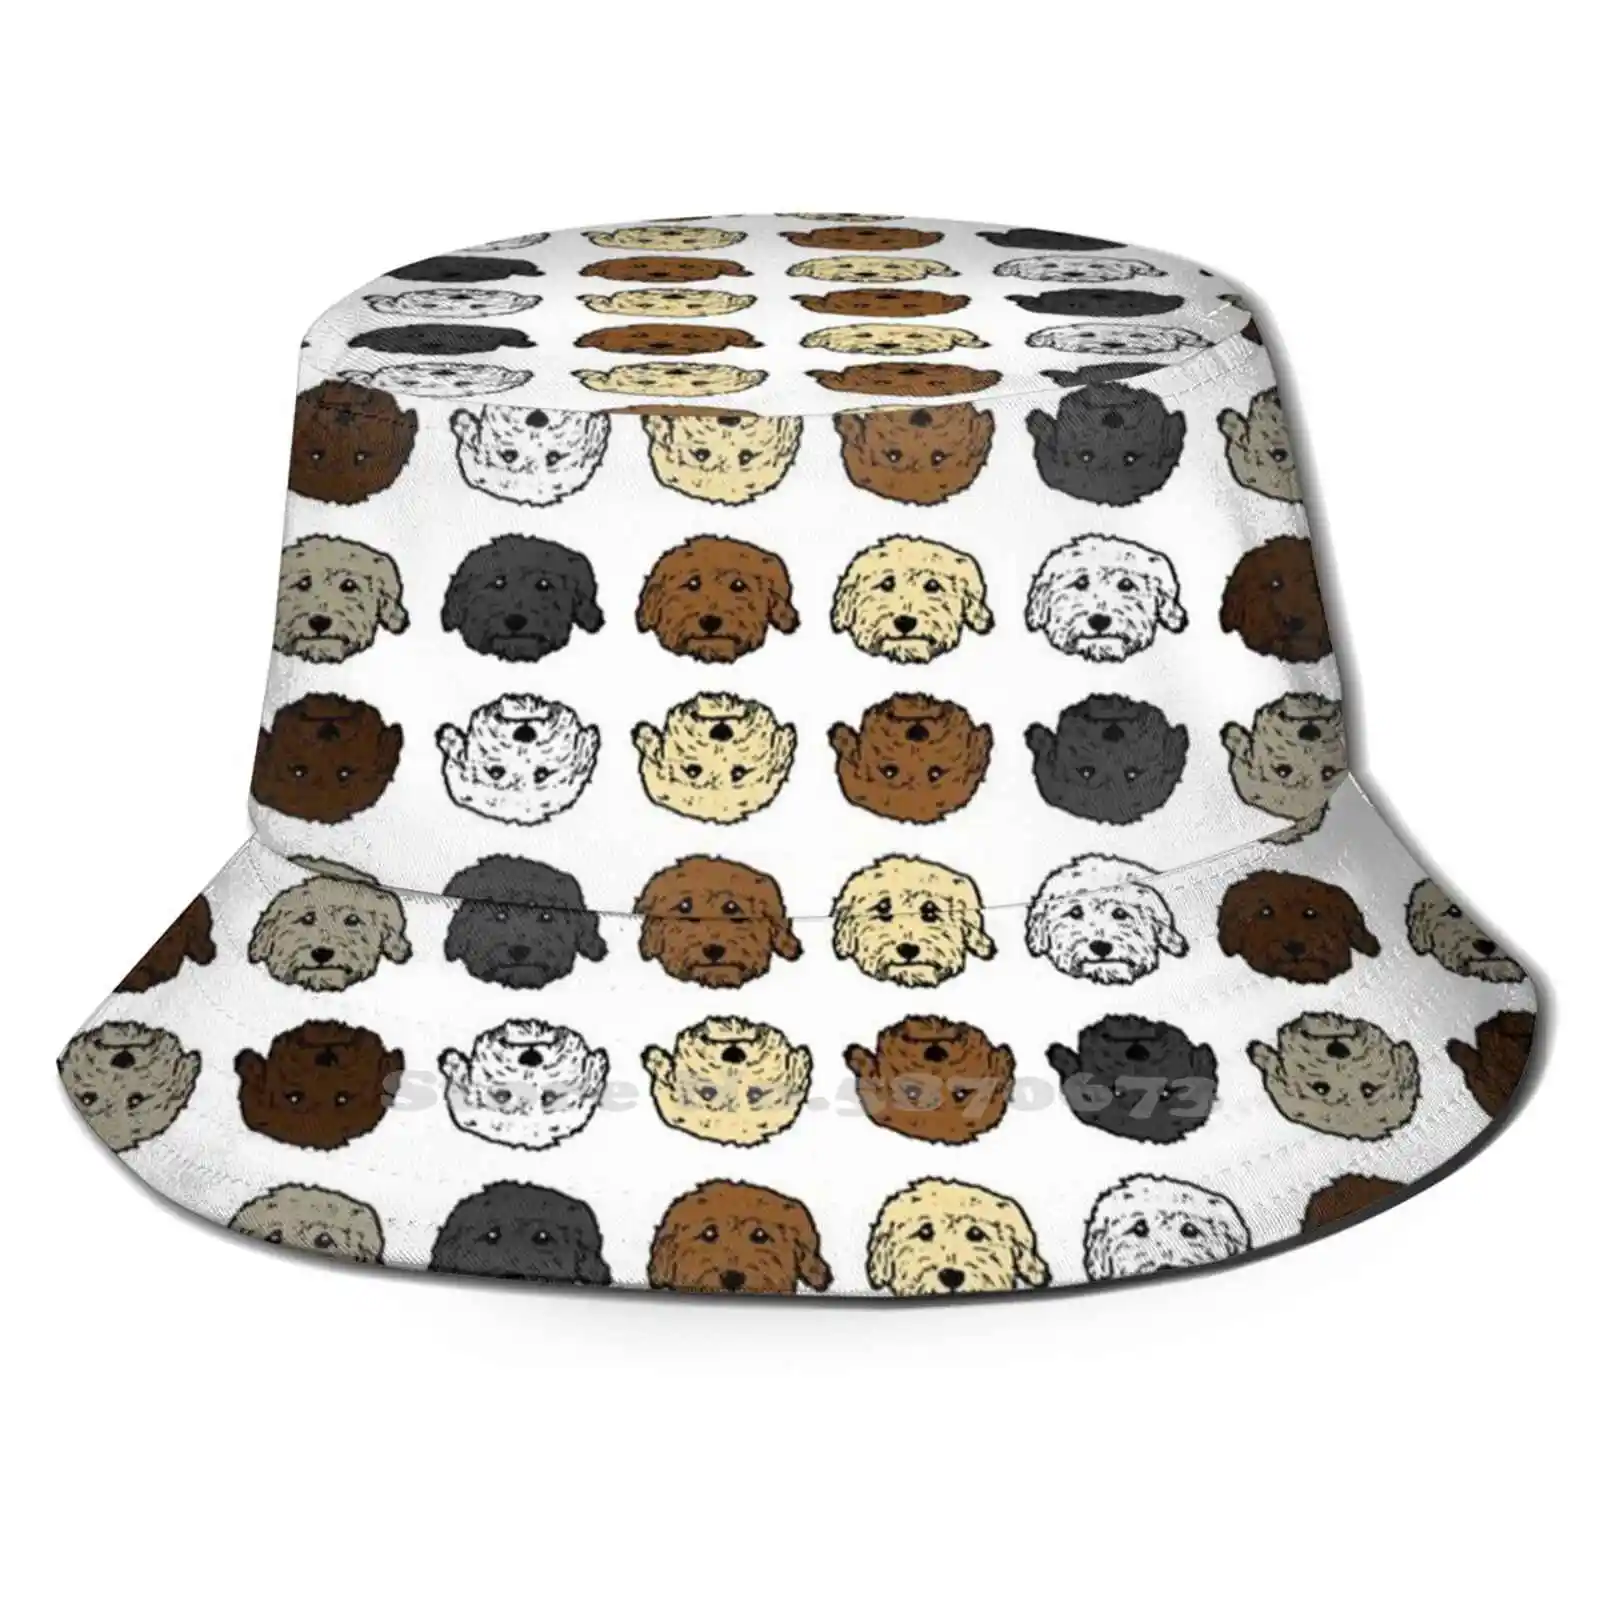 

Mini Doodle Dog Heads-Up And Down Doodles On White-Doodle Dog Colors Fishing Hunting Climbing Cap Fisherman Hats